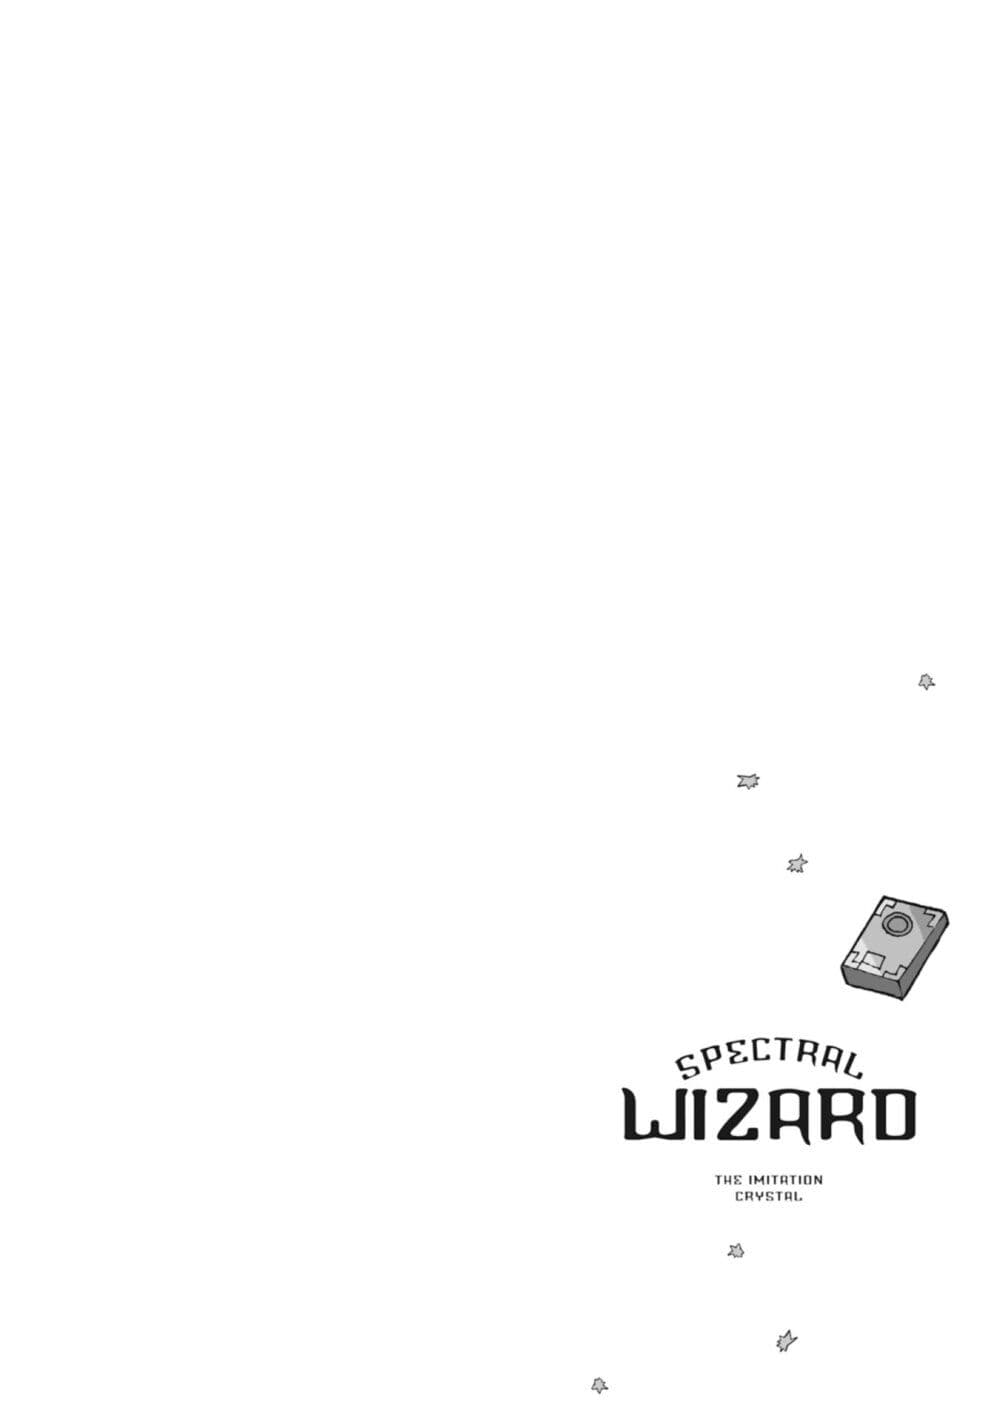 Spectral Wizard 2.5 26